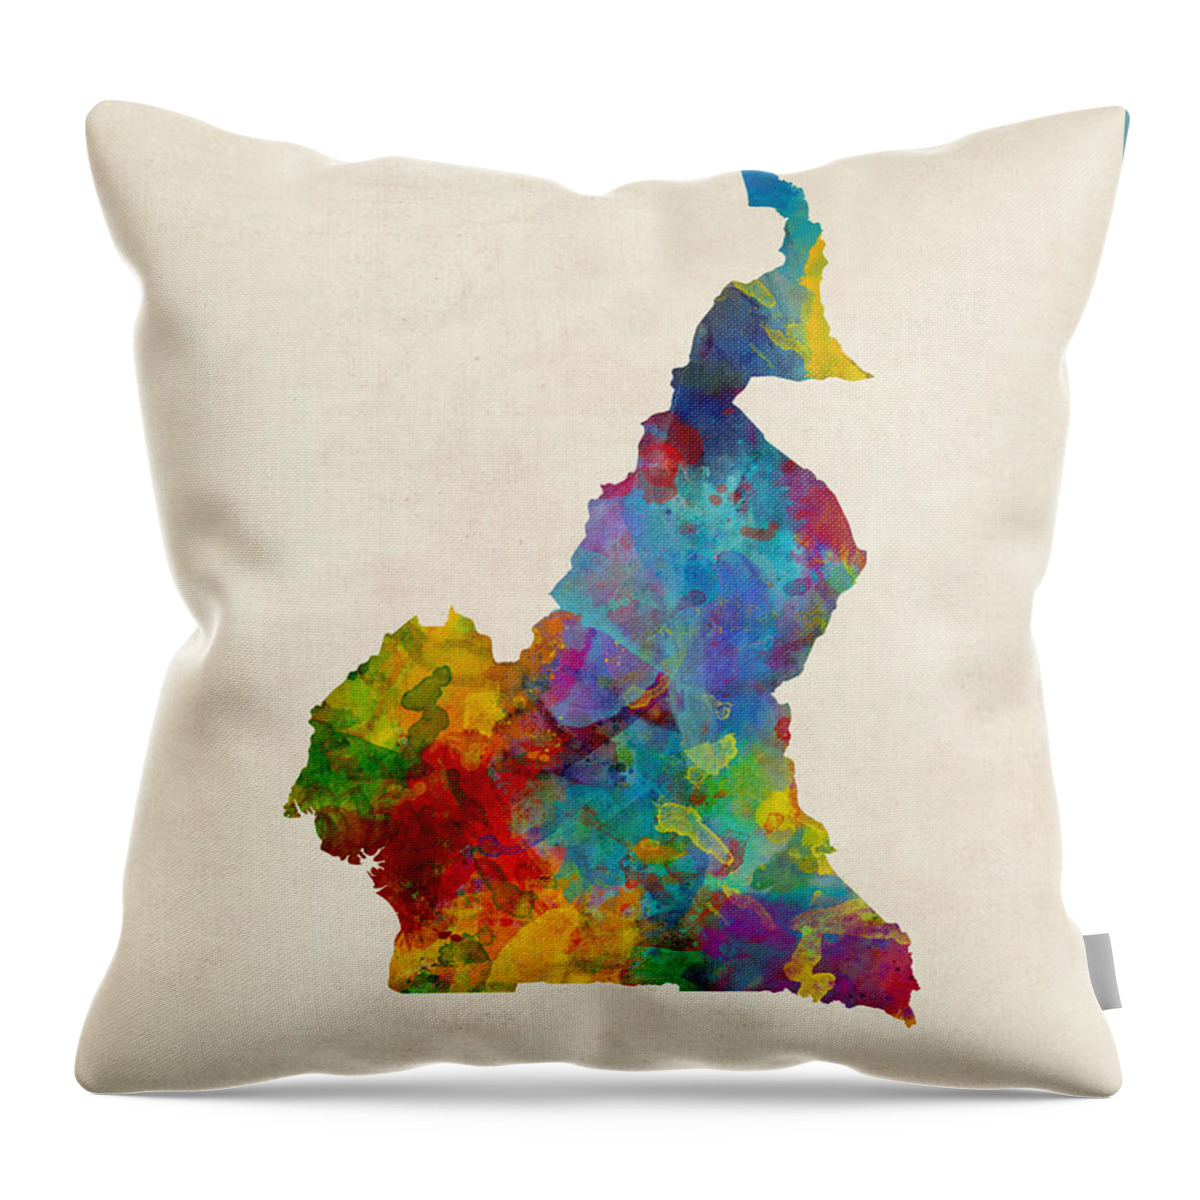 Cameroon Throw Pillow featuring the digital art Cameroon Watercolor Map by Michael Tompsett